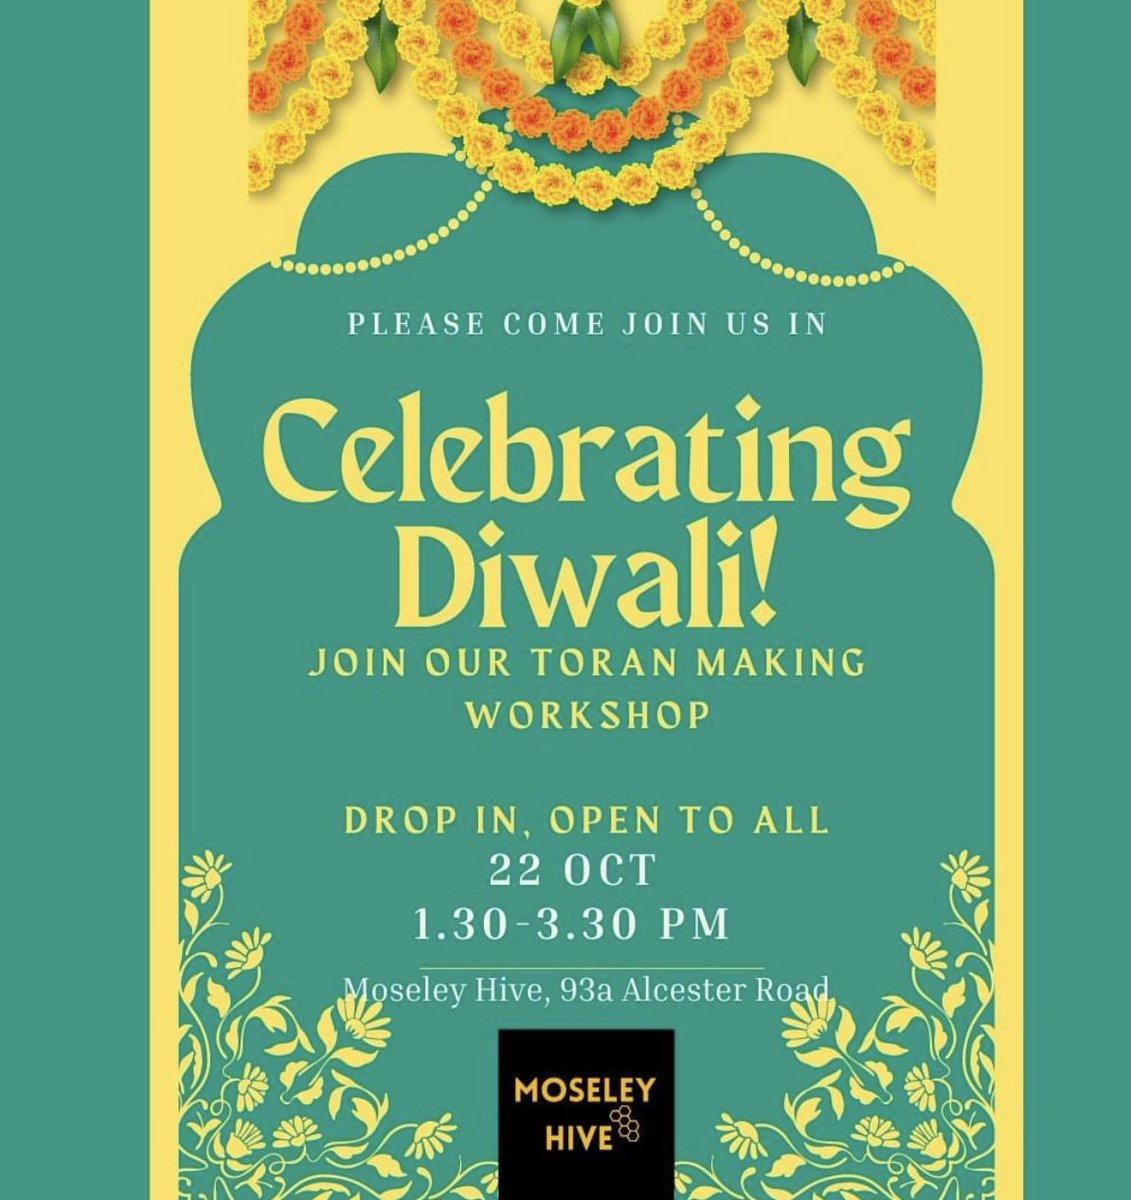 Tomorrow 1.30-3.30pm join @ideasloading for a free Toran Making Workshop. Suitable for all ages, let’s get crafty and celebrate Diwali 🪔 #Moseley